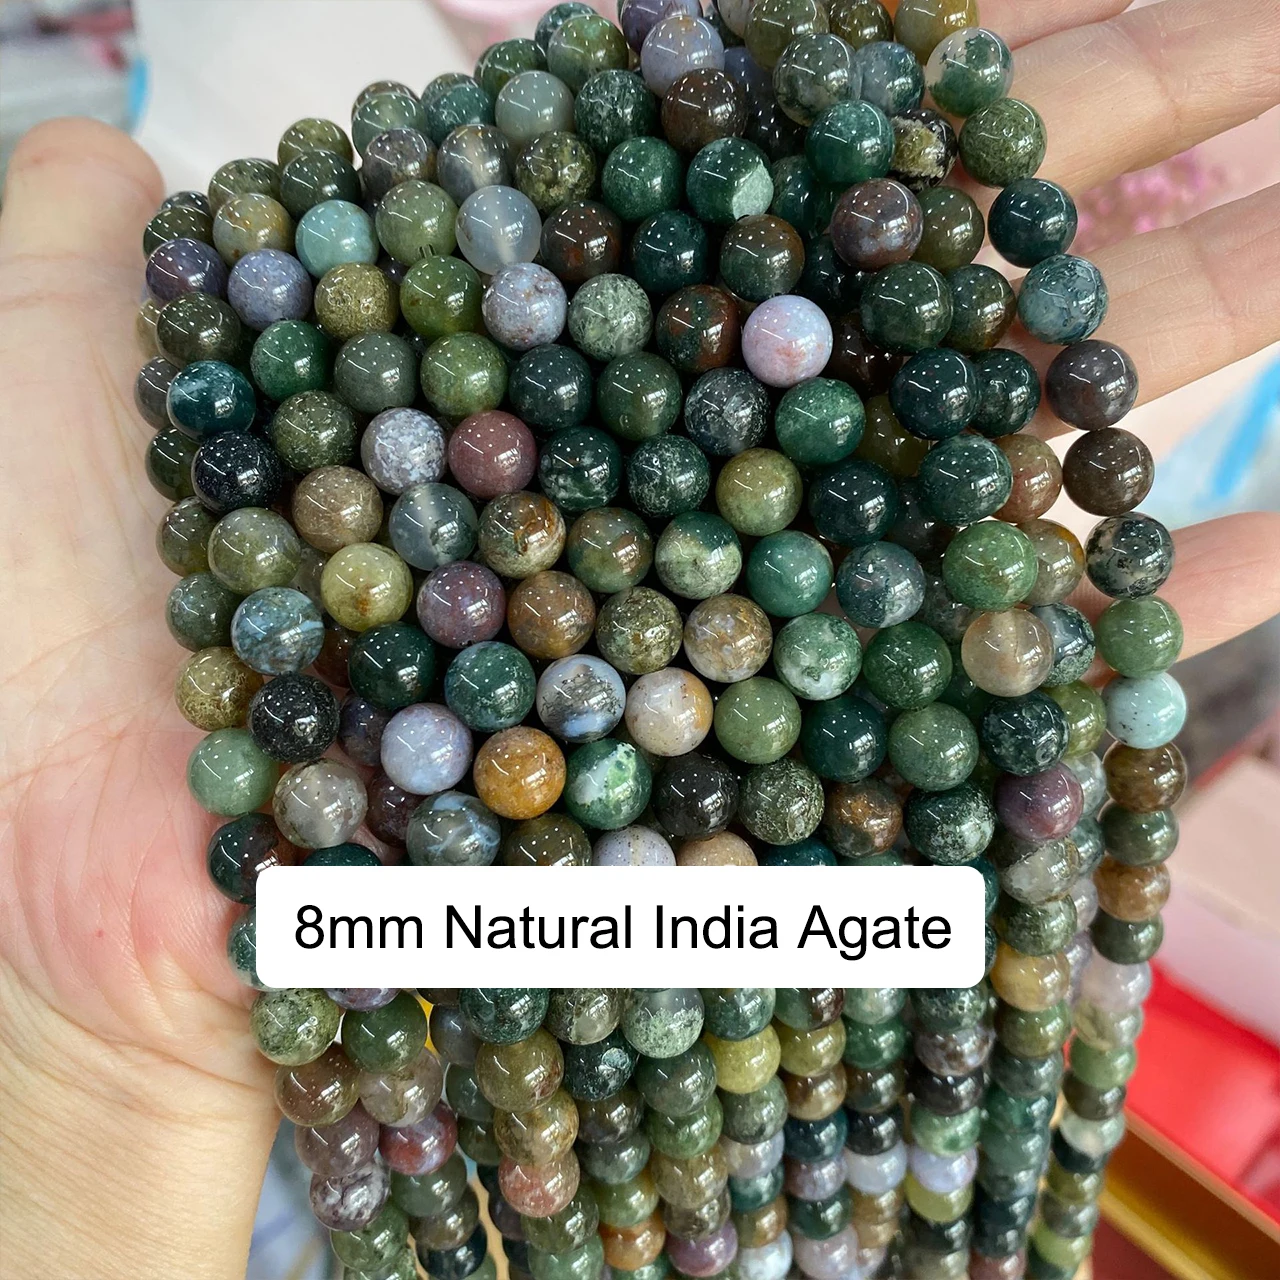 

Bestone Loose Round Natural Polished Gemstone Stone Beads Indian Agate Beads For Jewelry Making